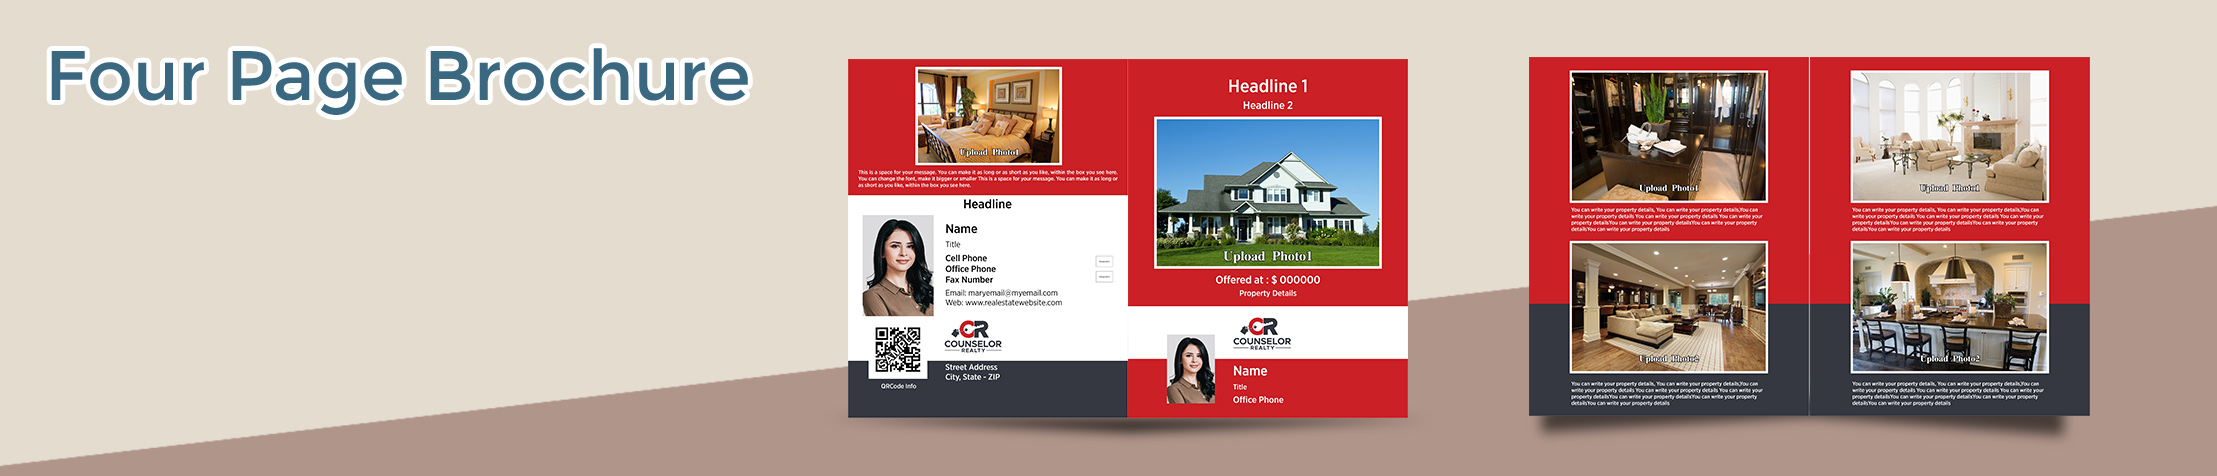 Counselor Realty Real Estate Flyers and Brochures - Counselor Realty four page brochure templates for open houses and marketing | BestPrintBuy.com